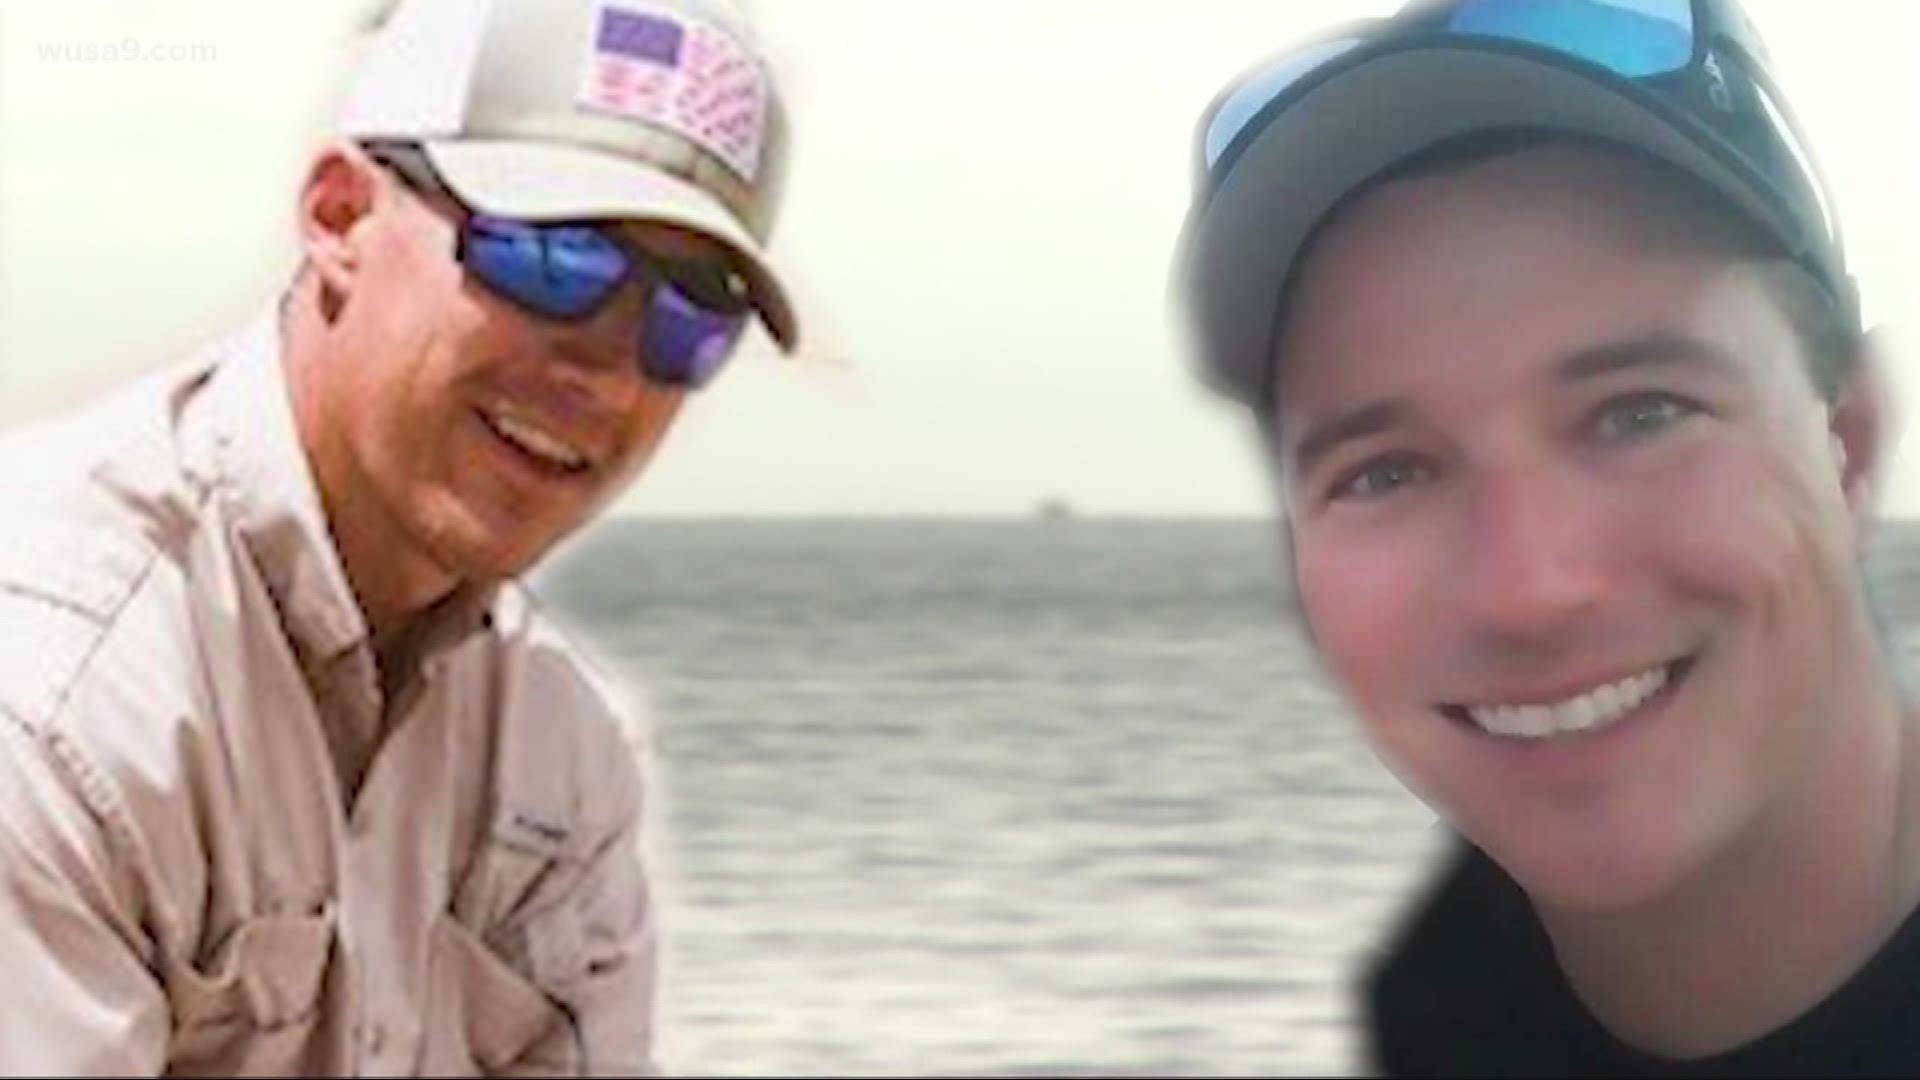 Fairfax County firefighter Justin Walker and his friend Brian McCluney were last seen setting off on a boat Friday morning from Cape Canaveral.
At a news conference Wednesday afternoon, officials said there are more than one hundred people searching for the men in Florida, Georgia, and the Carolinas.